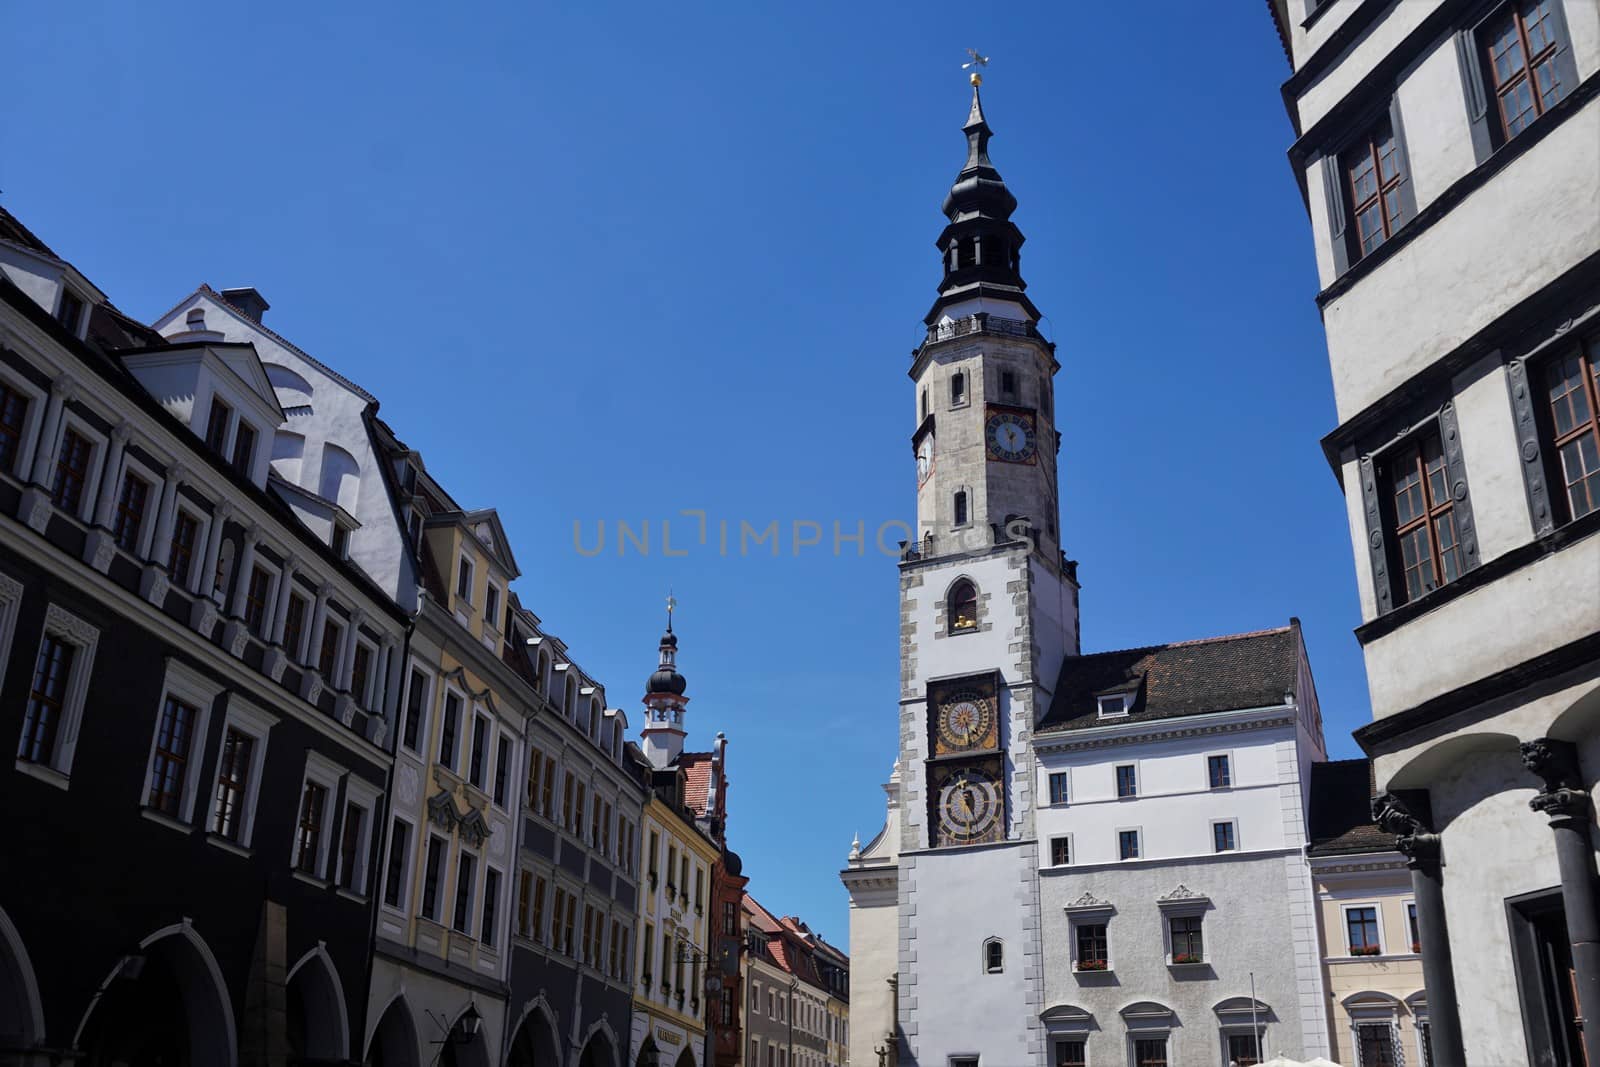 The Old Town Hall with the moon phase clock and restaurated houses surrounding the Lower Market Square